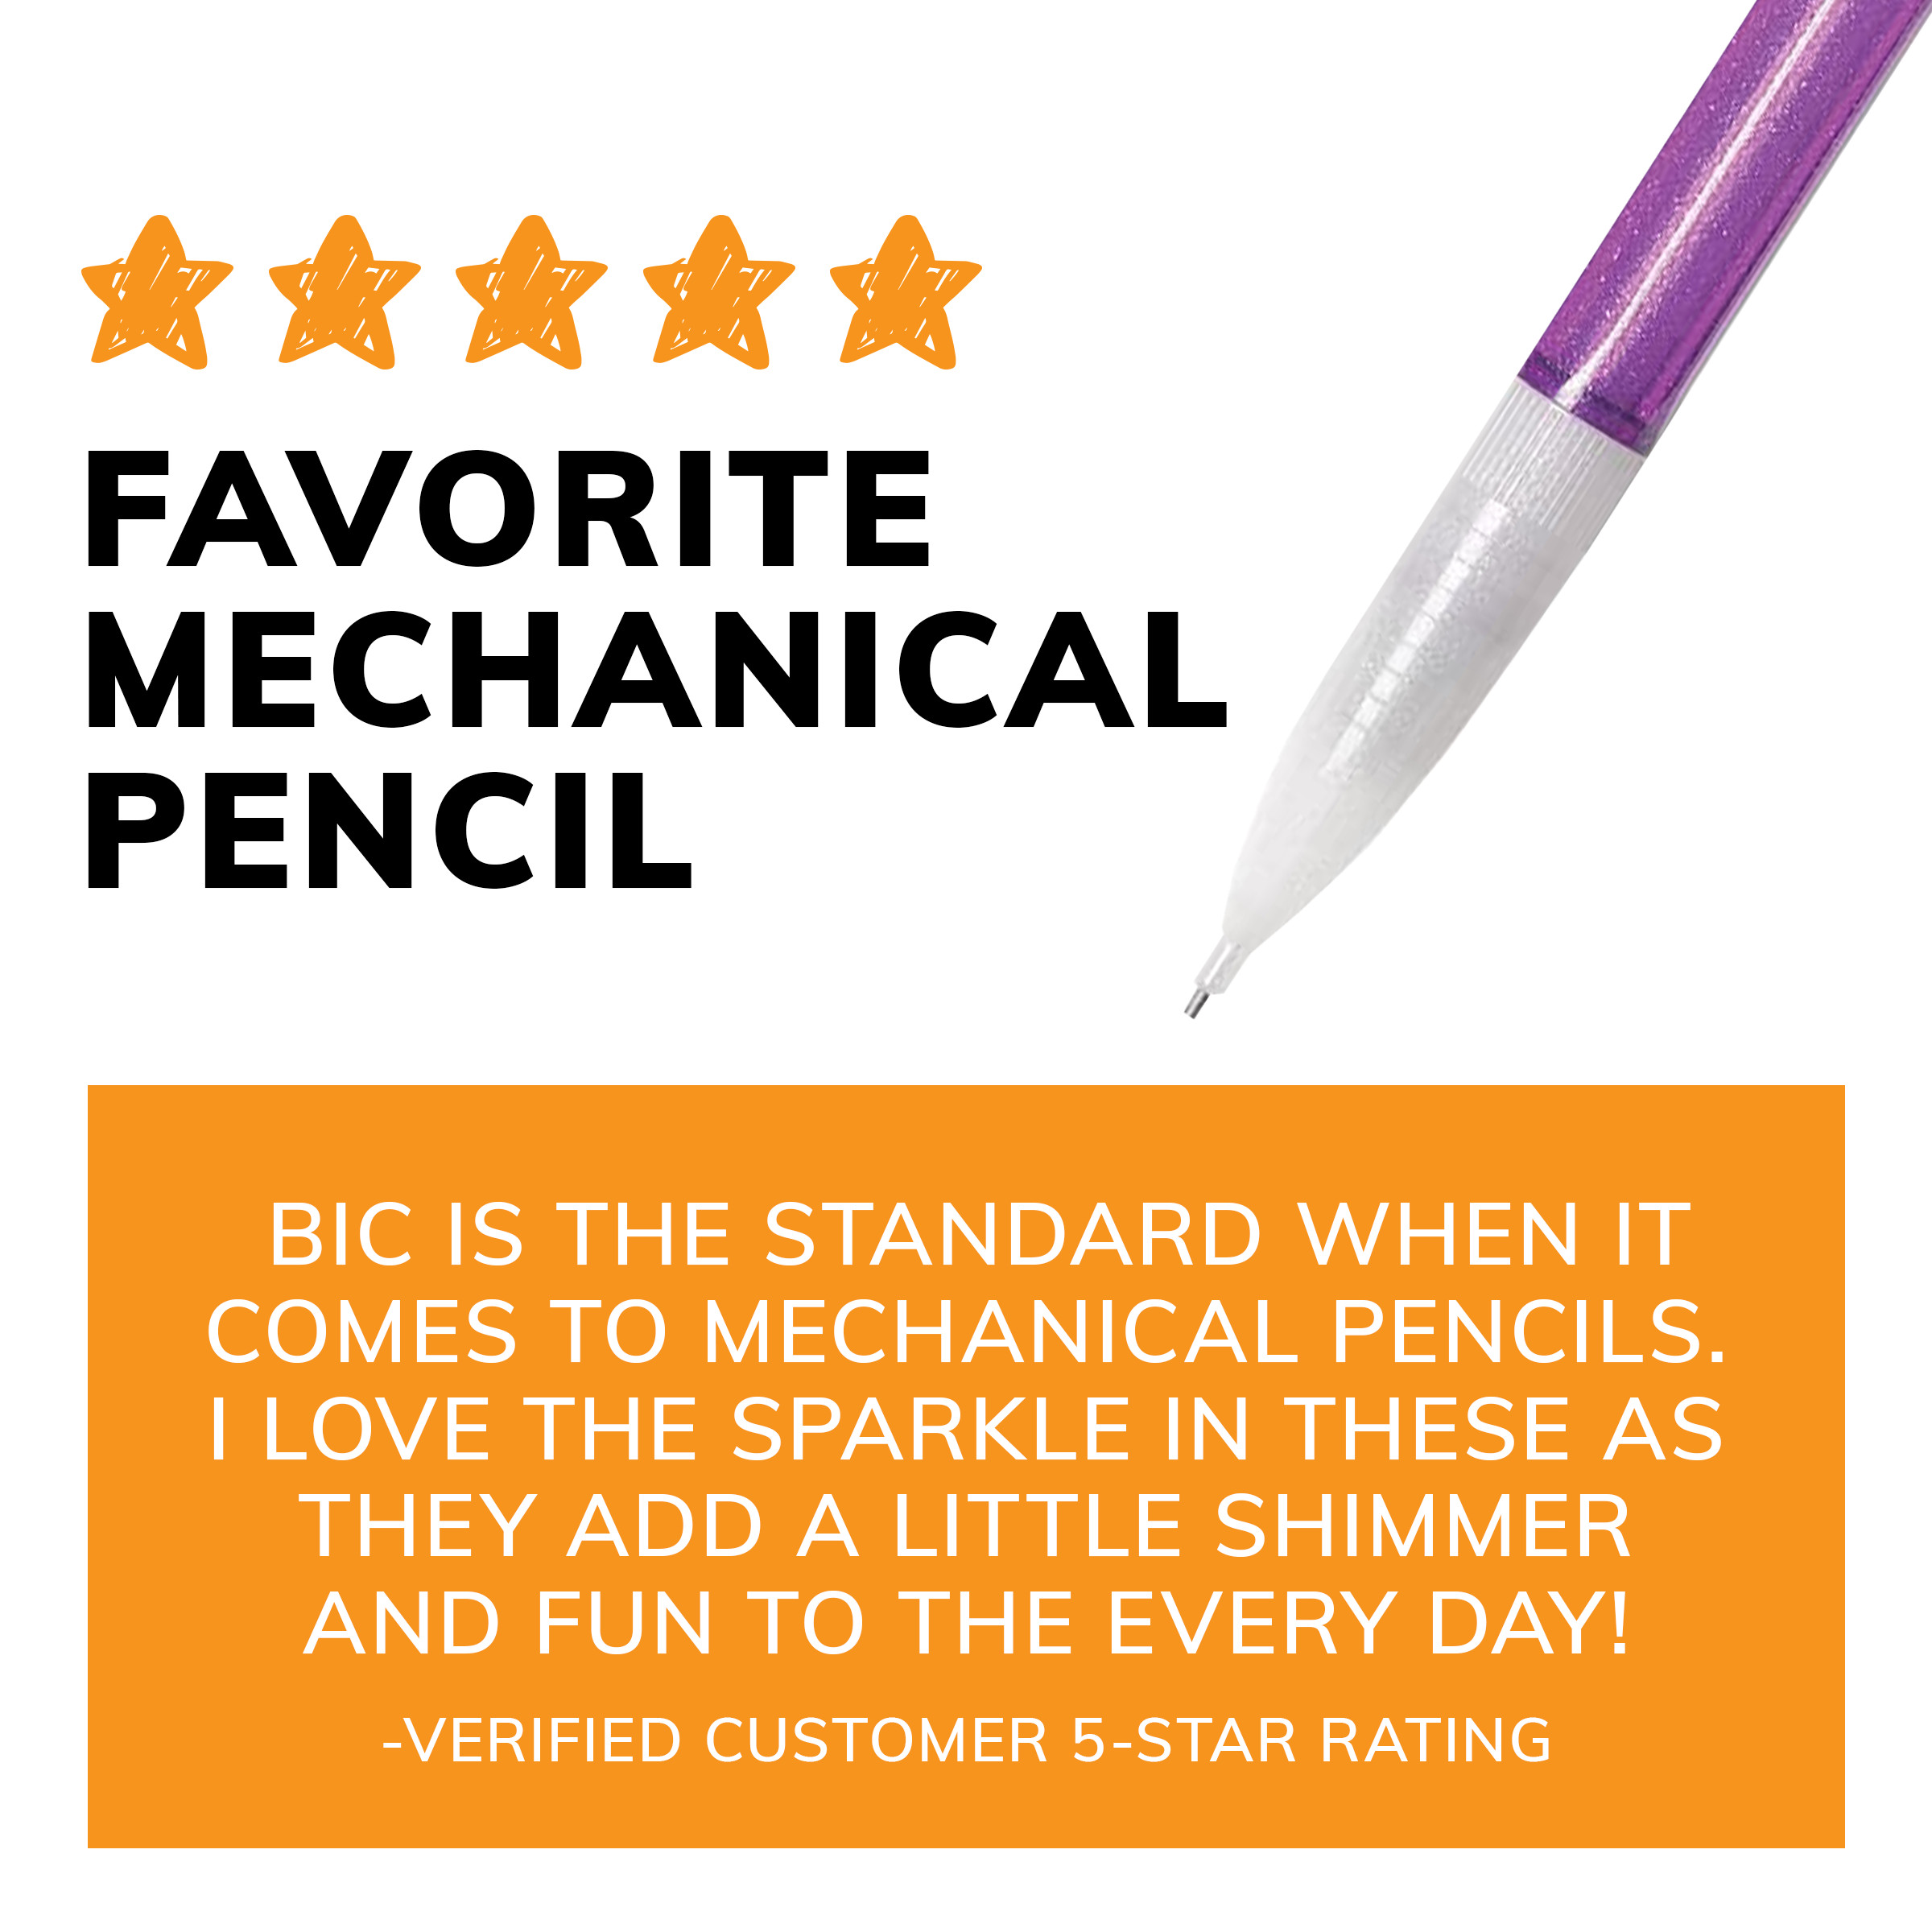 BIC Xtra-Sparkle No. 2 Mechanical Pencils with Erasers, Medium Point (0.7mm), 24 Pencils - image 3 of 13